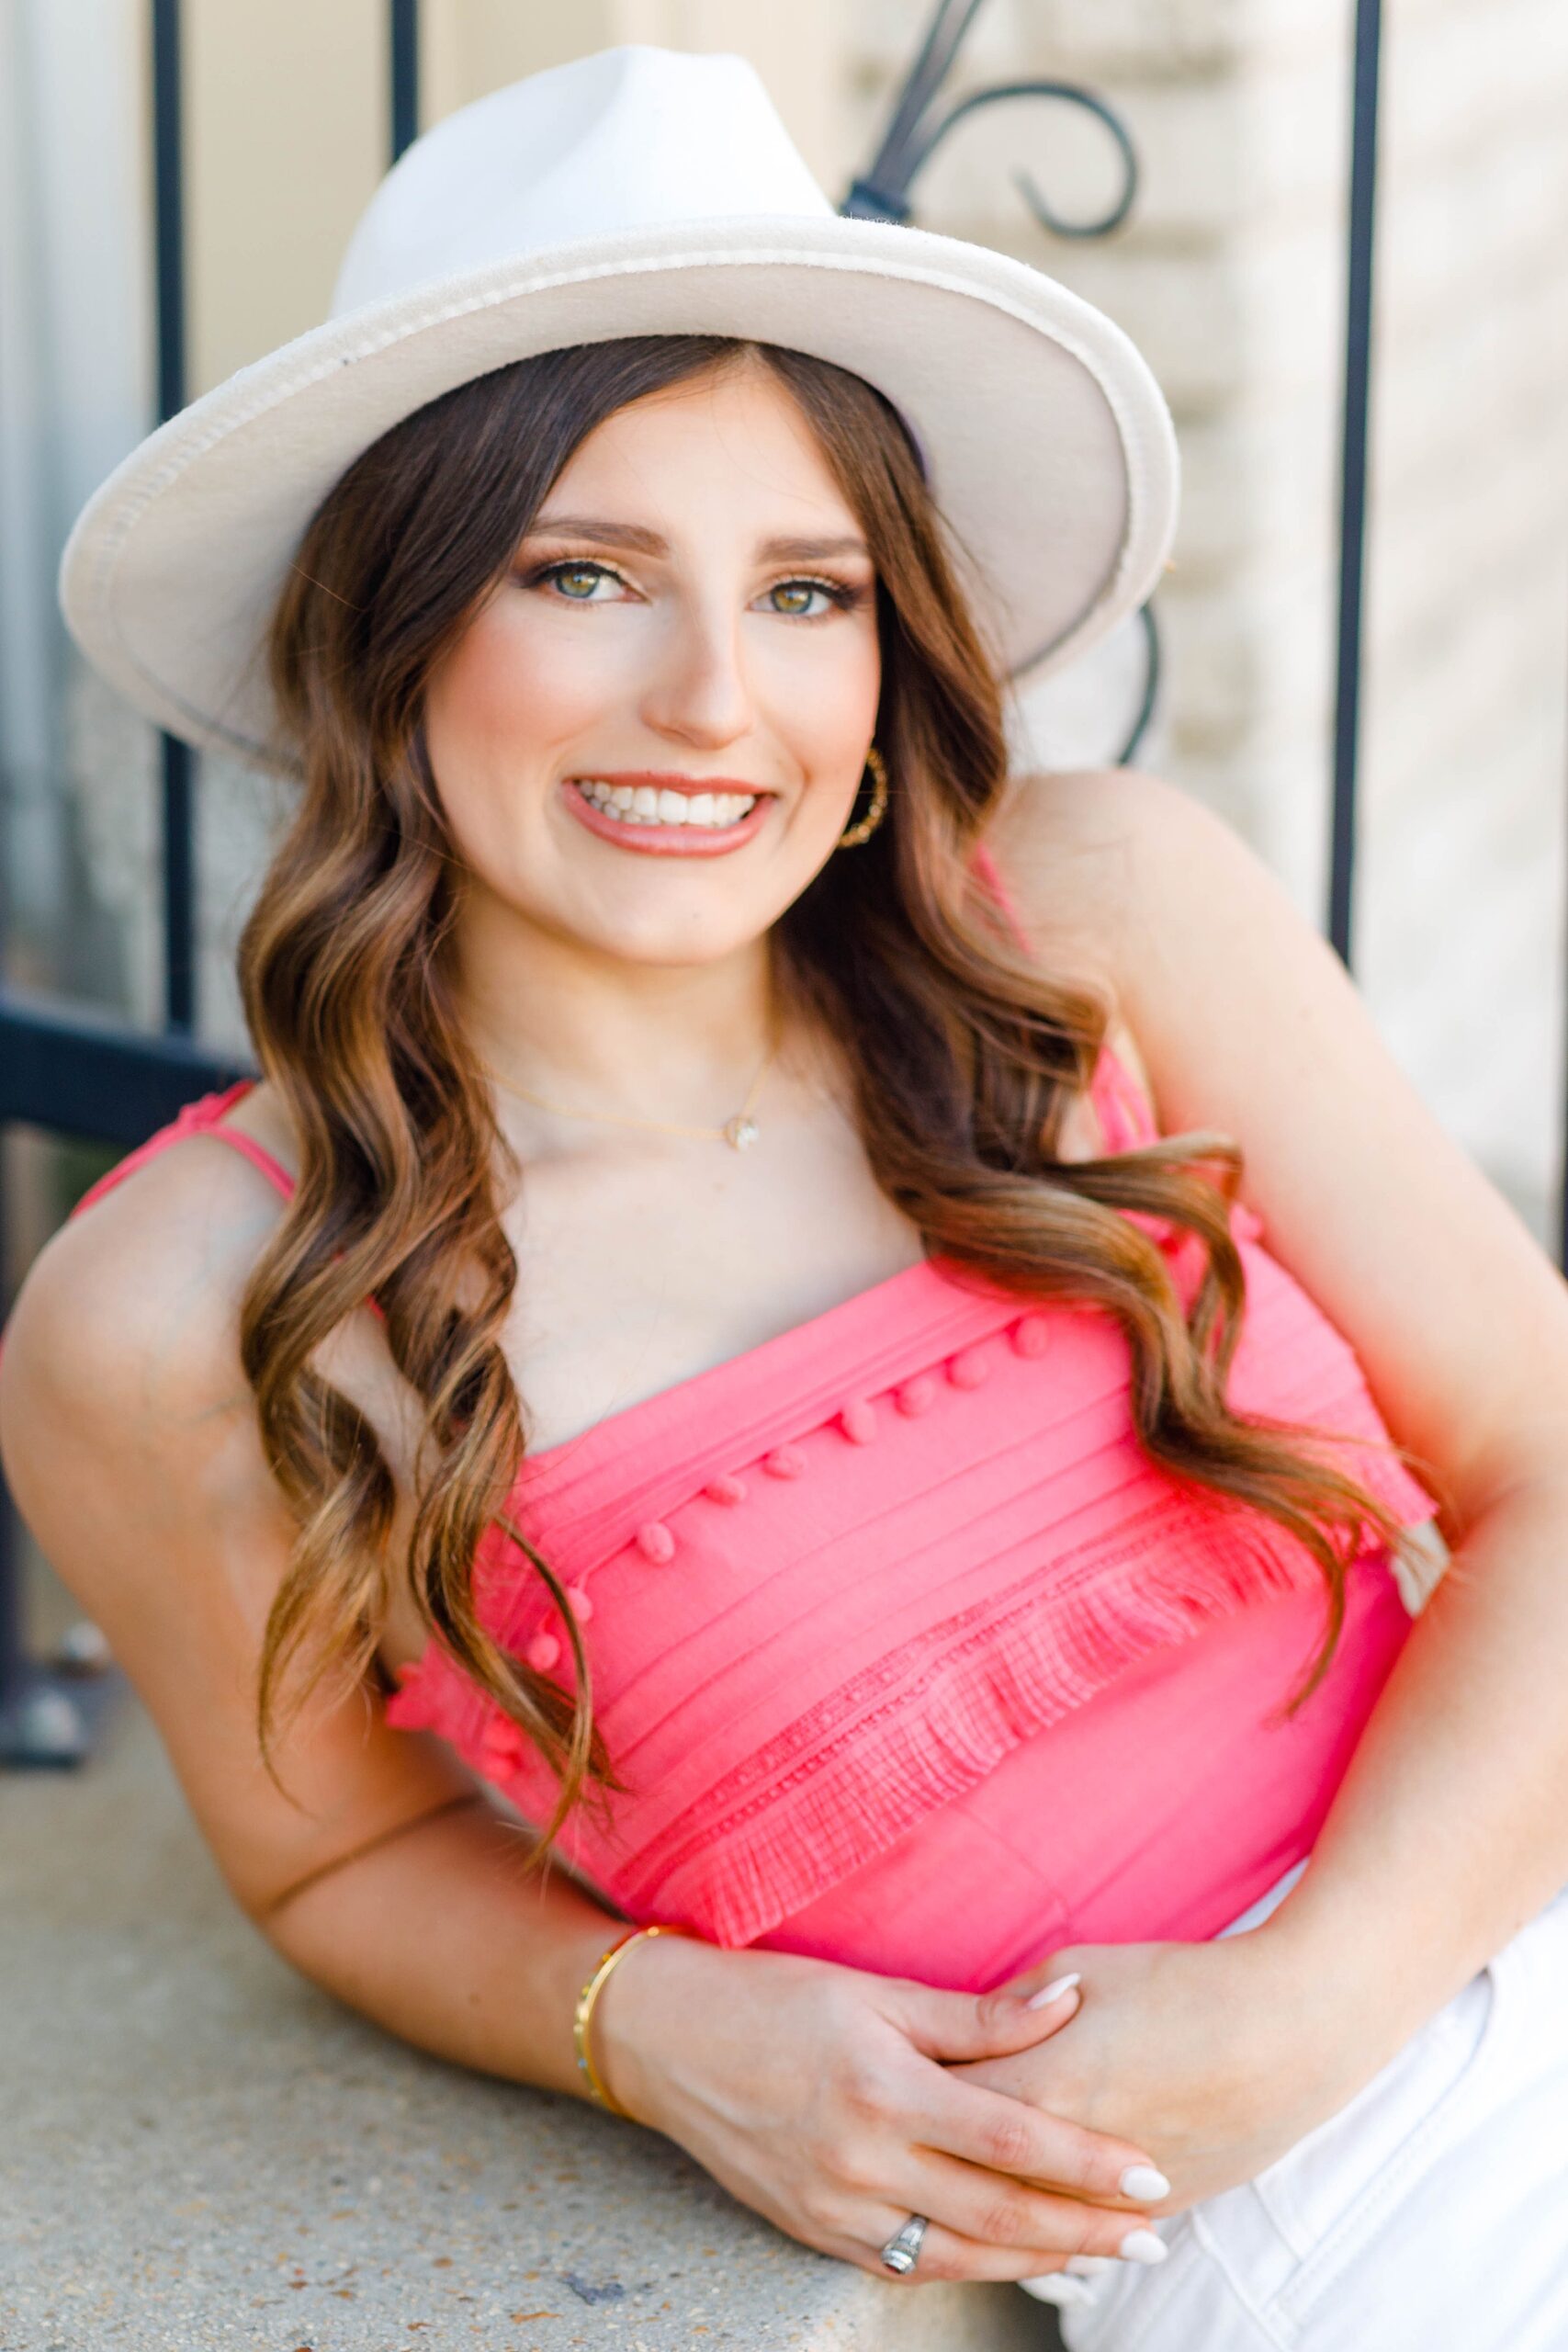 Southern Louisiana senior portraits of girl in pink shirt and white hat